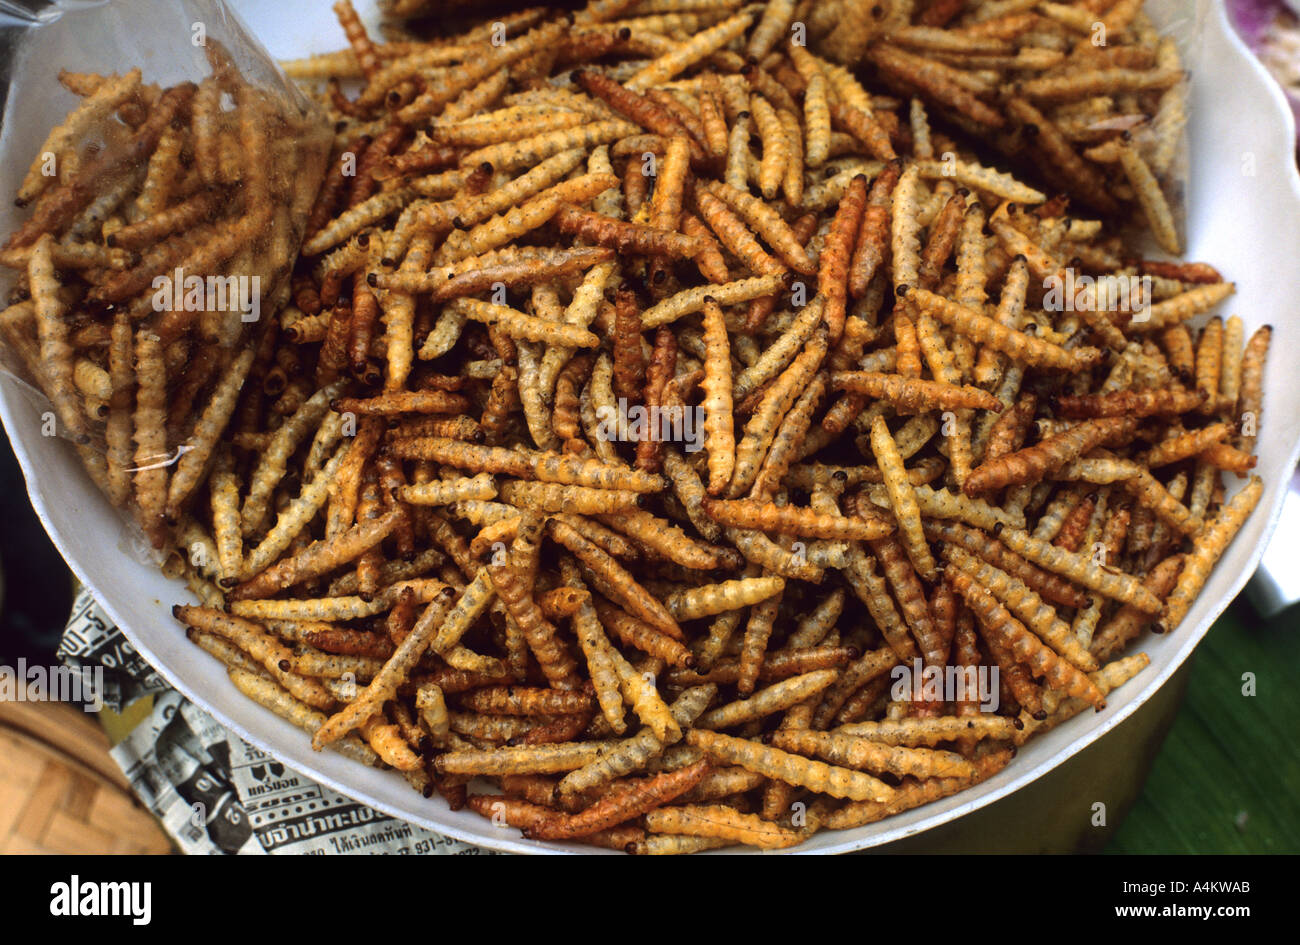 A bowl of roaster grub worms for sale as food in Thailand Stock